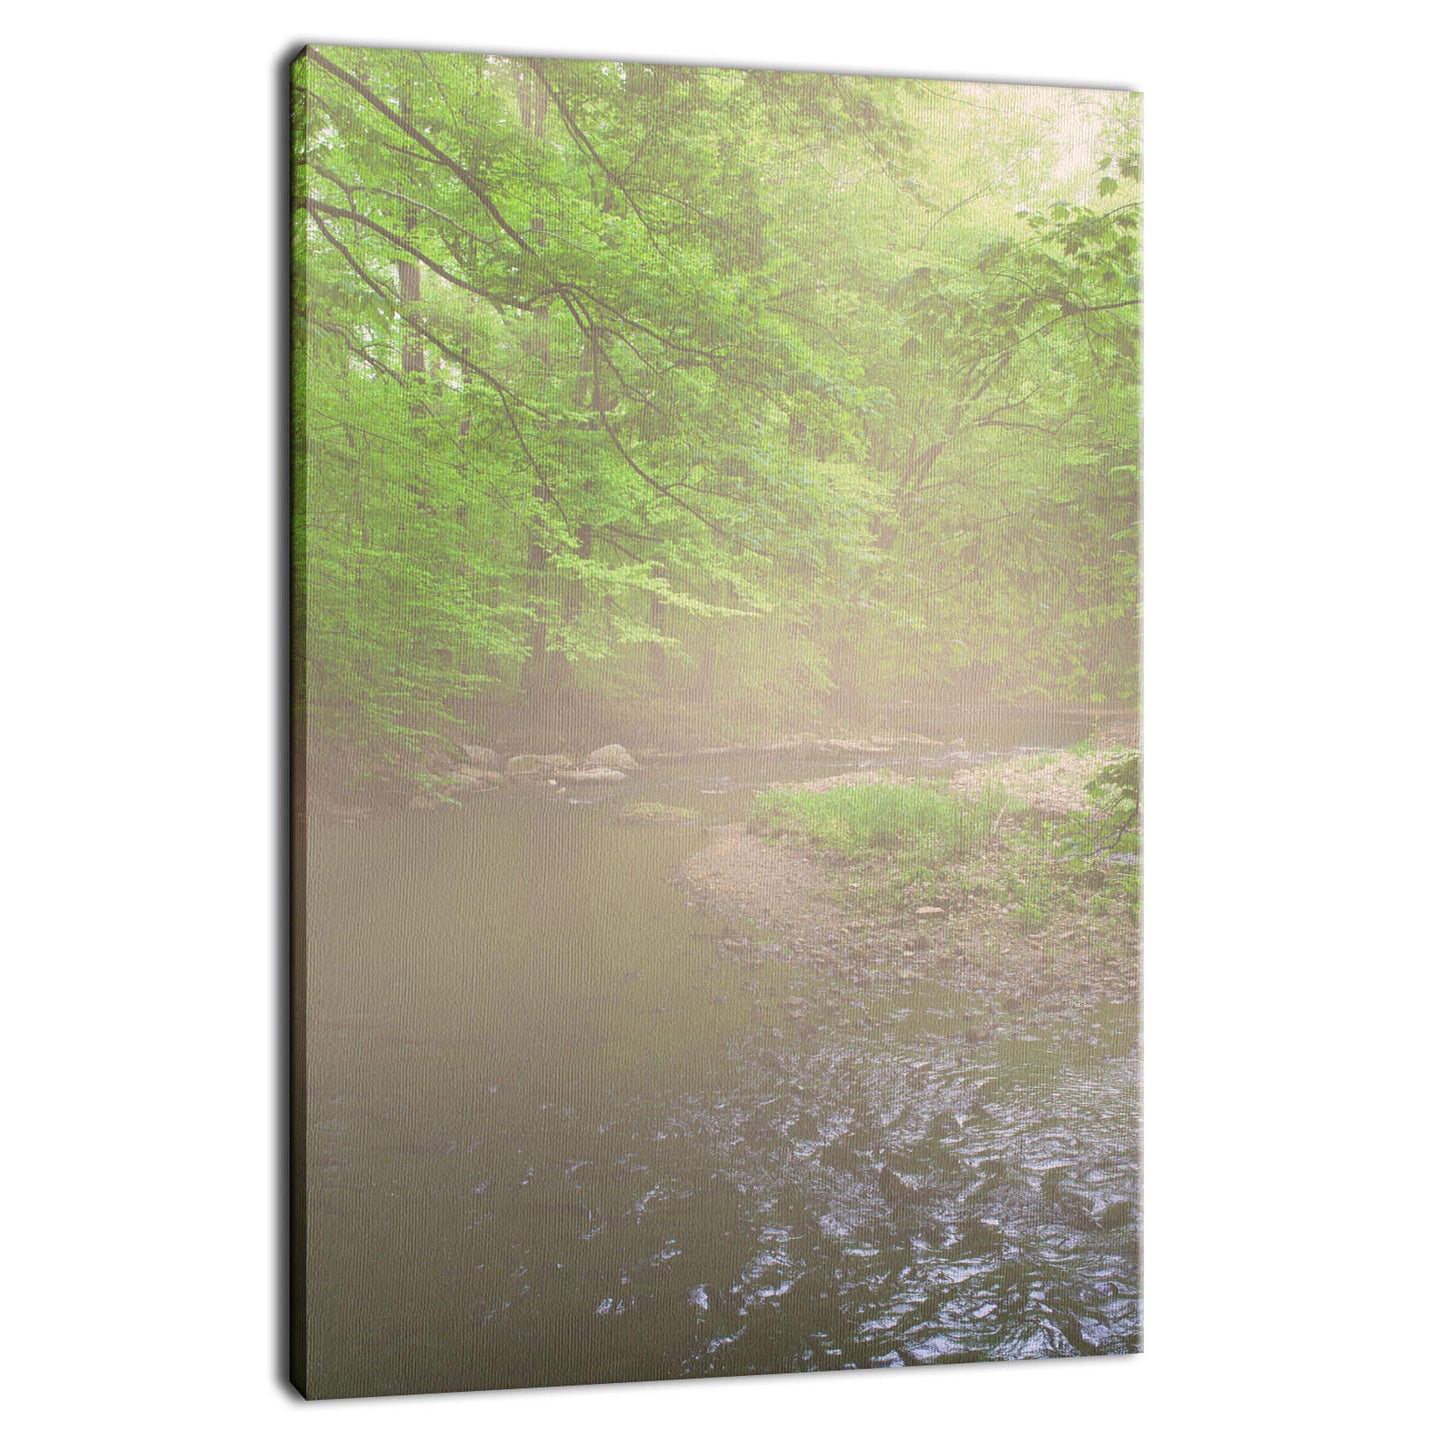 Early Morning Fog on the River Landscape Photo Fine Art Canvas Wall Art Prints  - PIPAFINEART